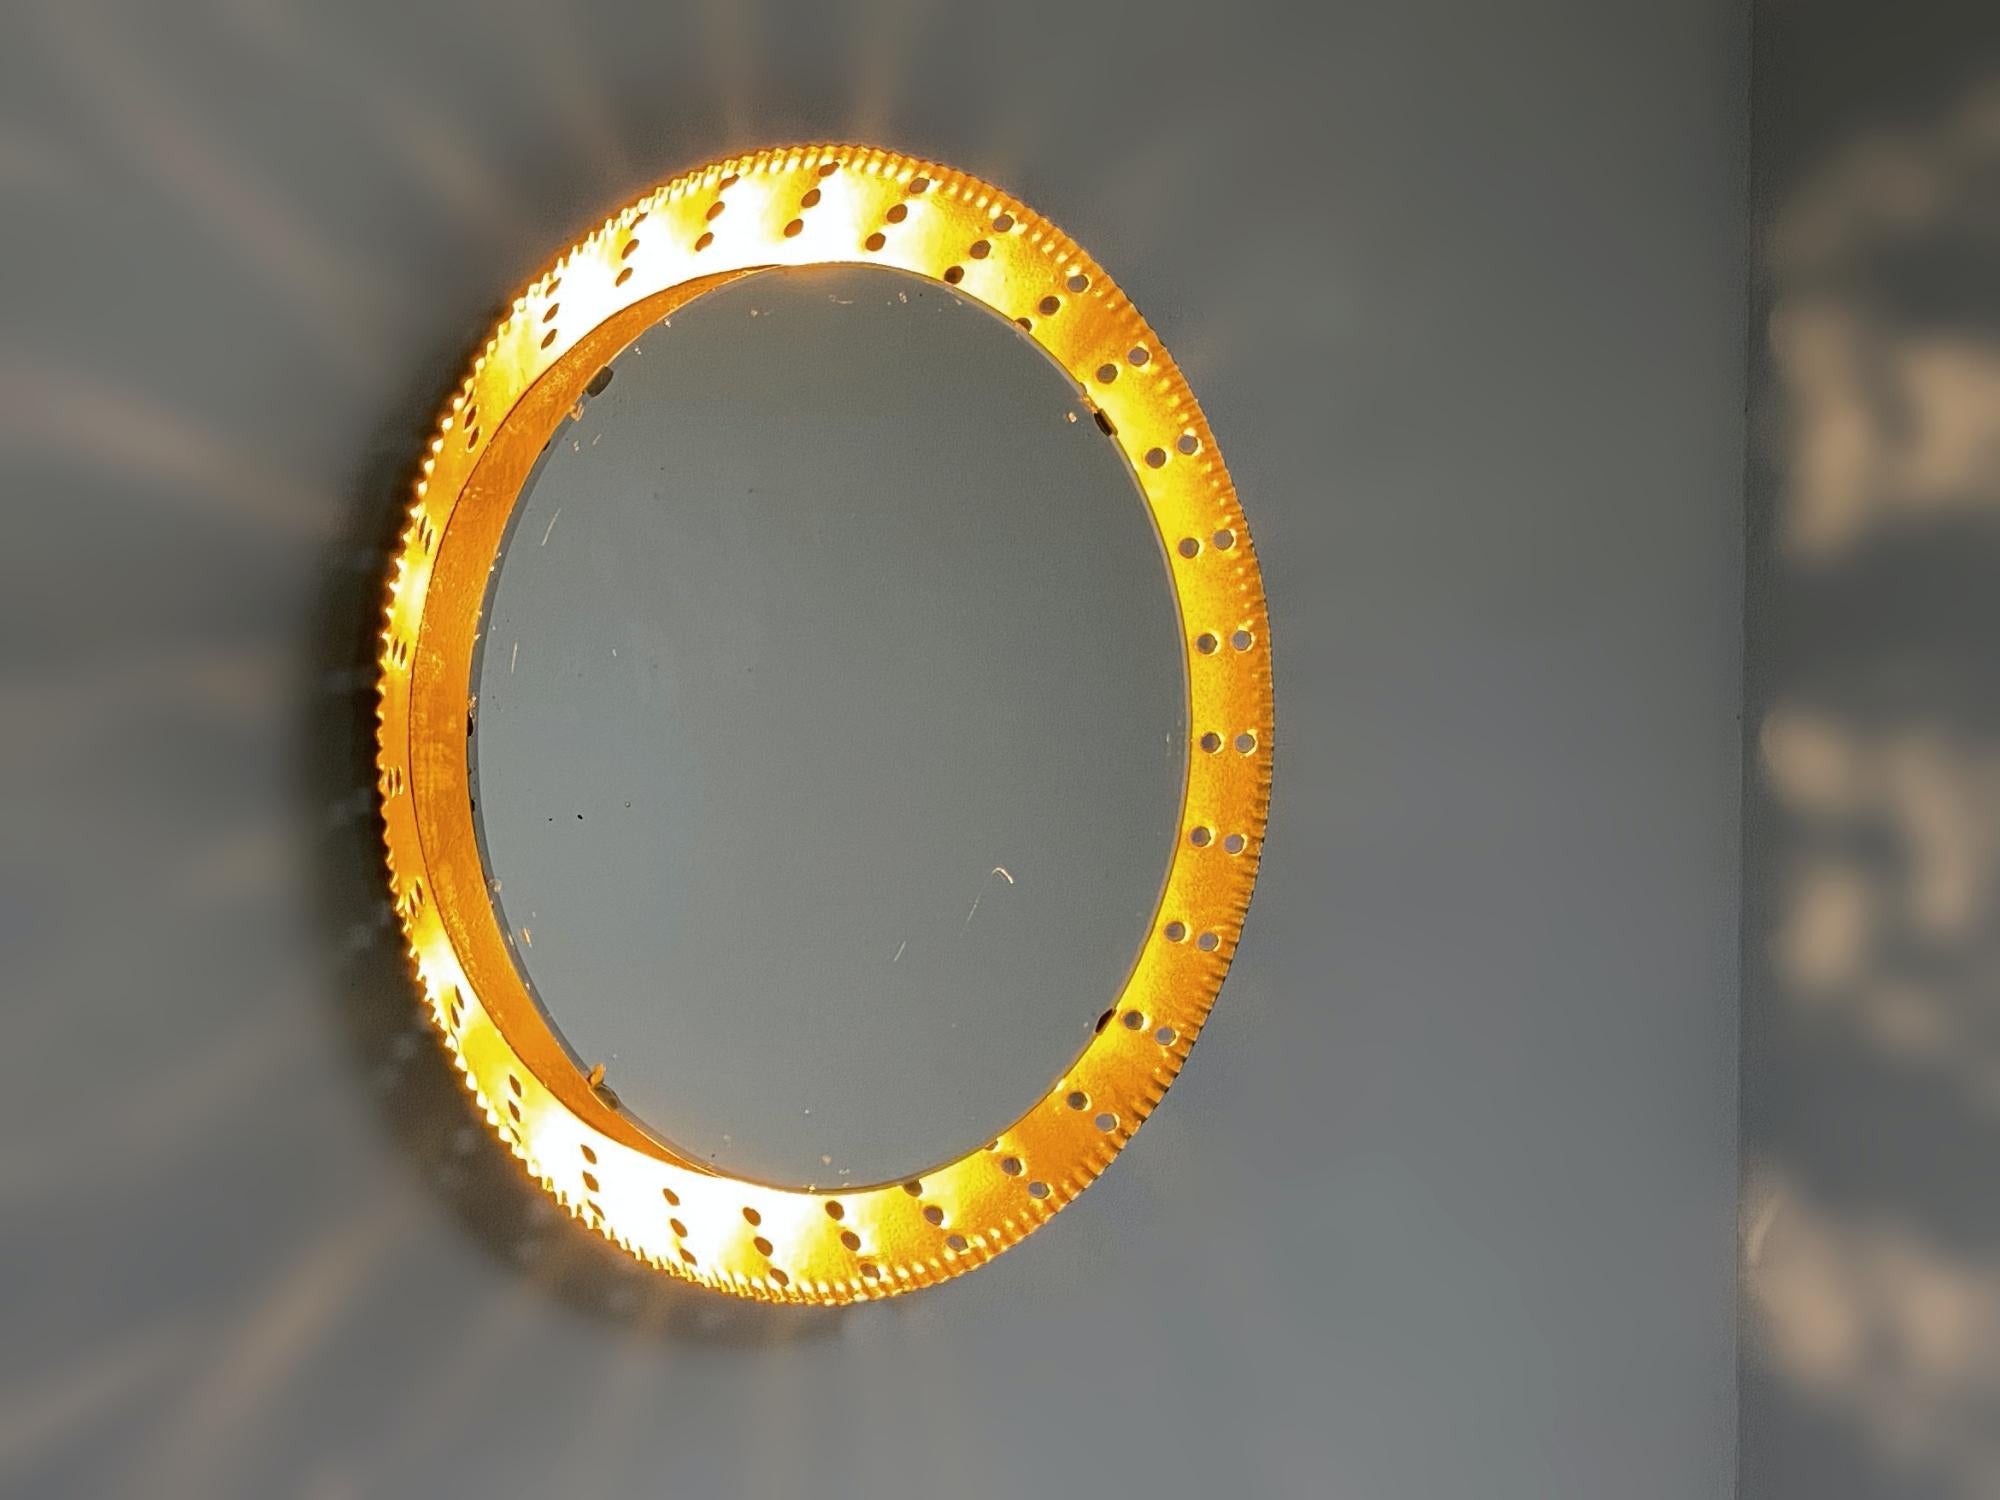 Hand-Crafted French Artisanal Illuminated Golden Sunburst Wall Mirror, 1960s, France For Sale